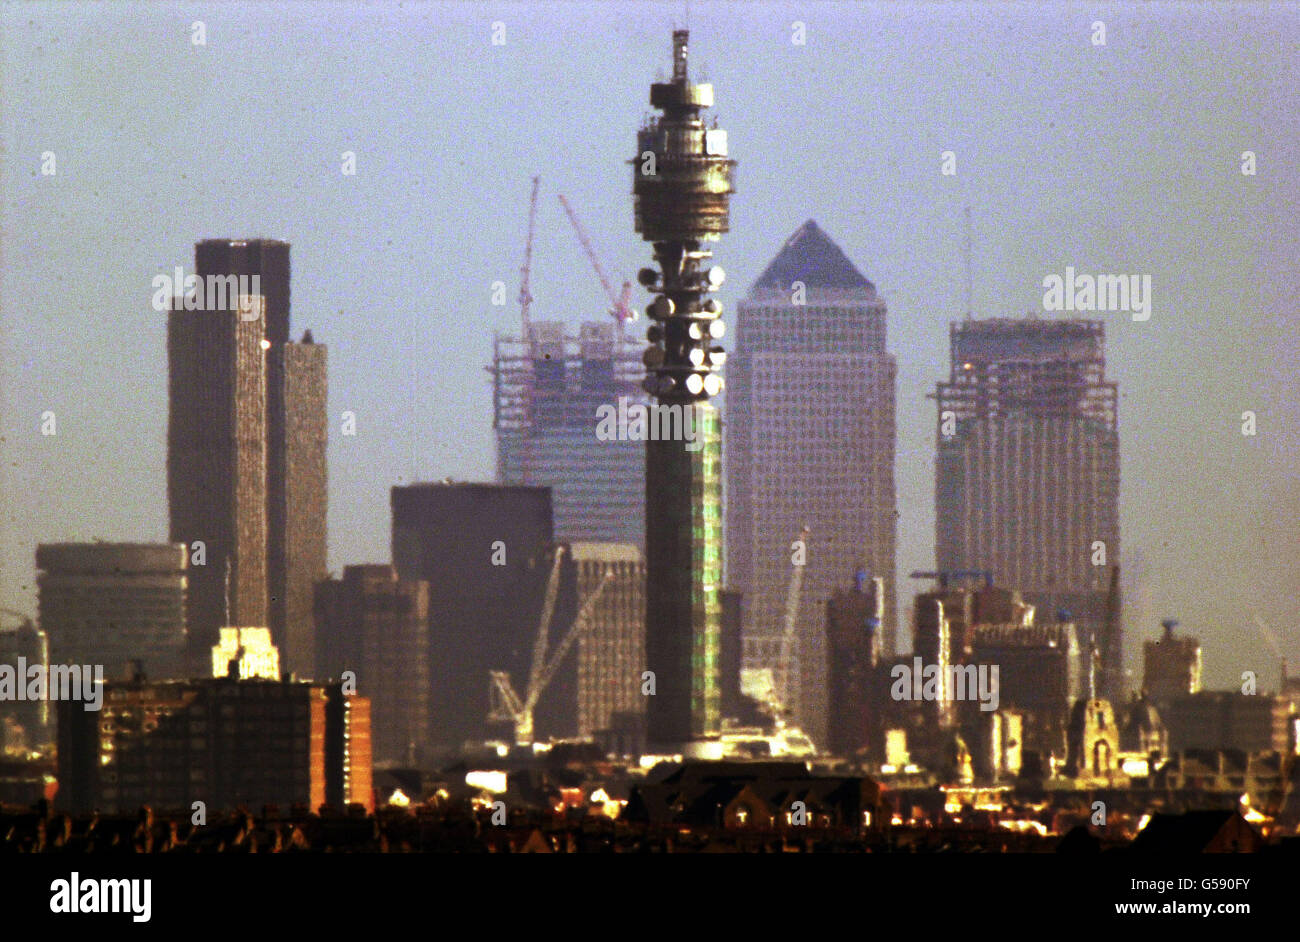 The changing skyline of London is dominated by the two new towers under construction at Canary Wharf in east London, which will be occupied by Citigroup (right) and HSBC. Each 700 feet high, they are due to be topped out later this autumn and completed in 2002. * They will stand alongside One Canada Square, which was completed in 1991 and at 800 feet is Britain's tallest building. It took the title from the Nat West Tower (now Tower 42) (left), completed in 1980 at 659 feet. Before then, the country's tallest building was the Post Office Tower (now the British Telecom Tower), first opened to Stock Photo